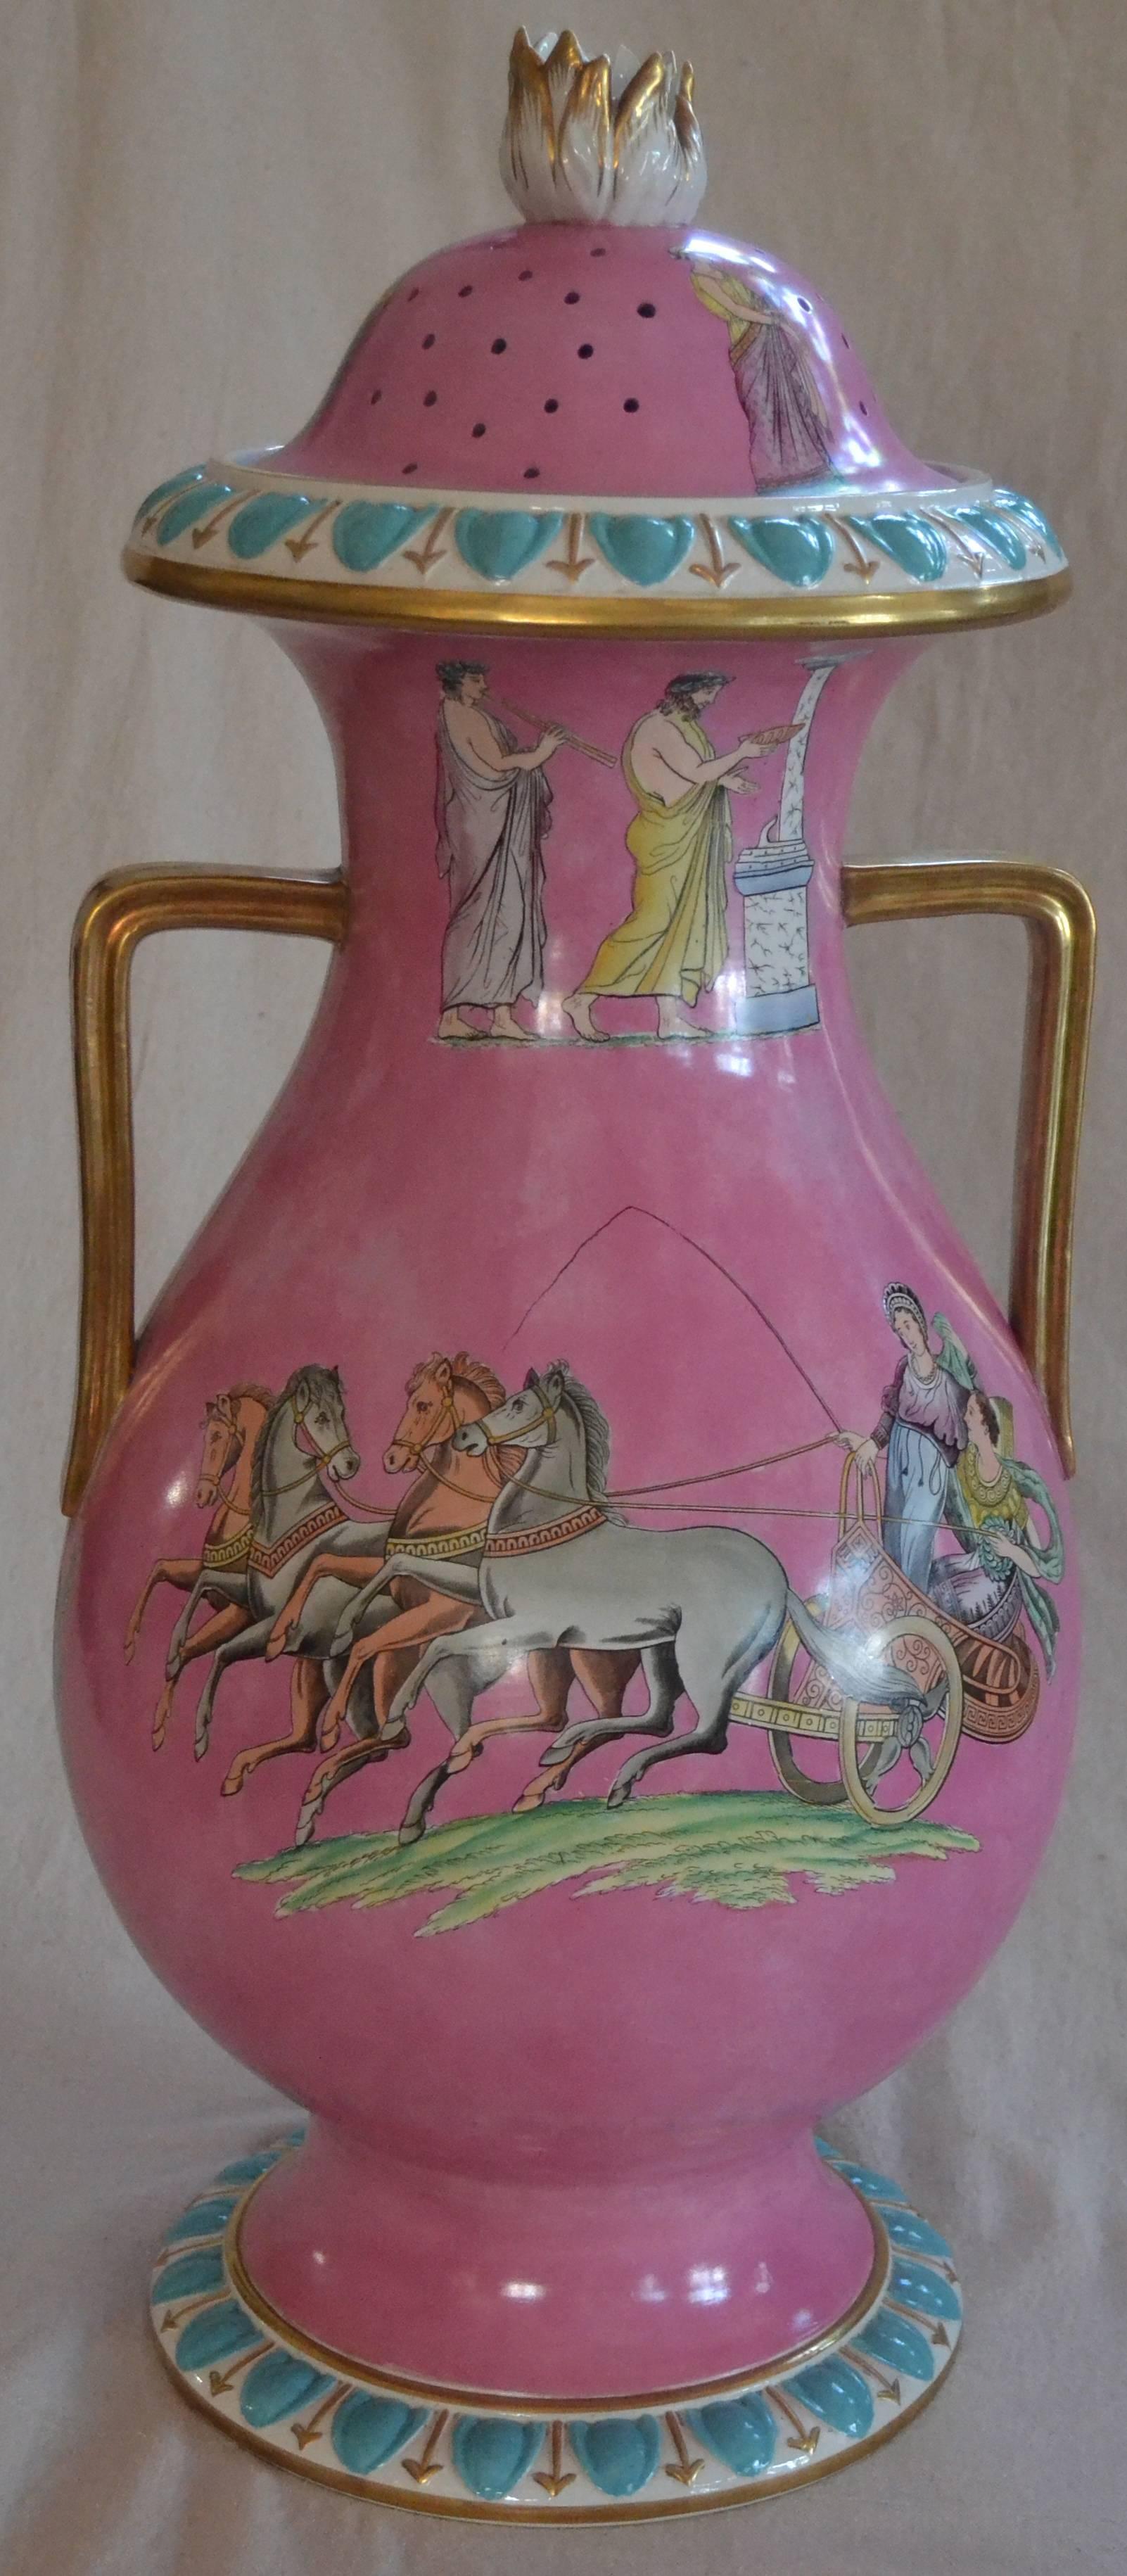 Monumental impressive ceramic leech jar with hand-colored transfer decoration and gilt handles.
Outstanding example of English ceramic art originally used for counter sales of medical leeches. Unusual pink ground with delicate coloration of the